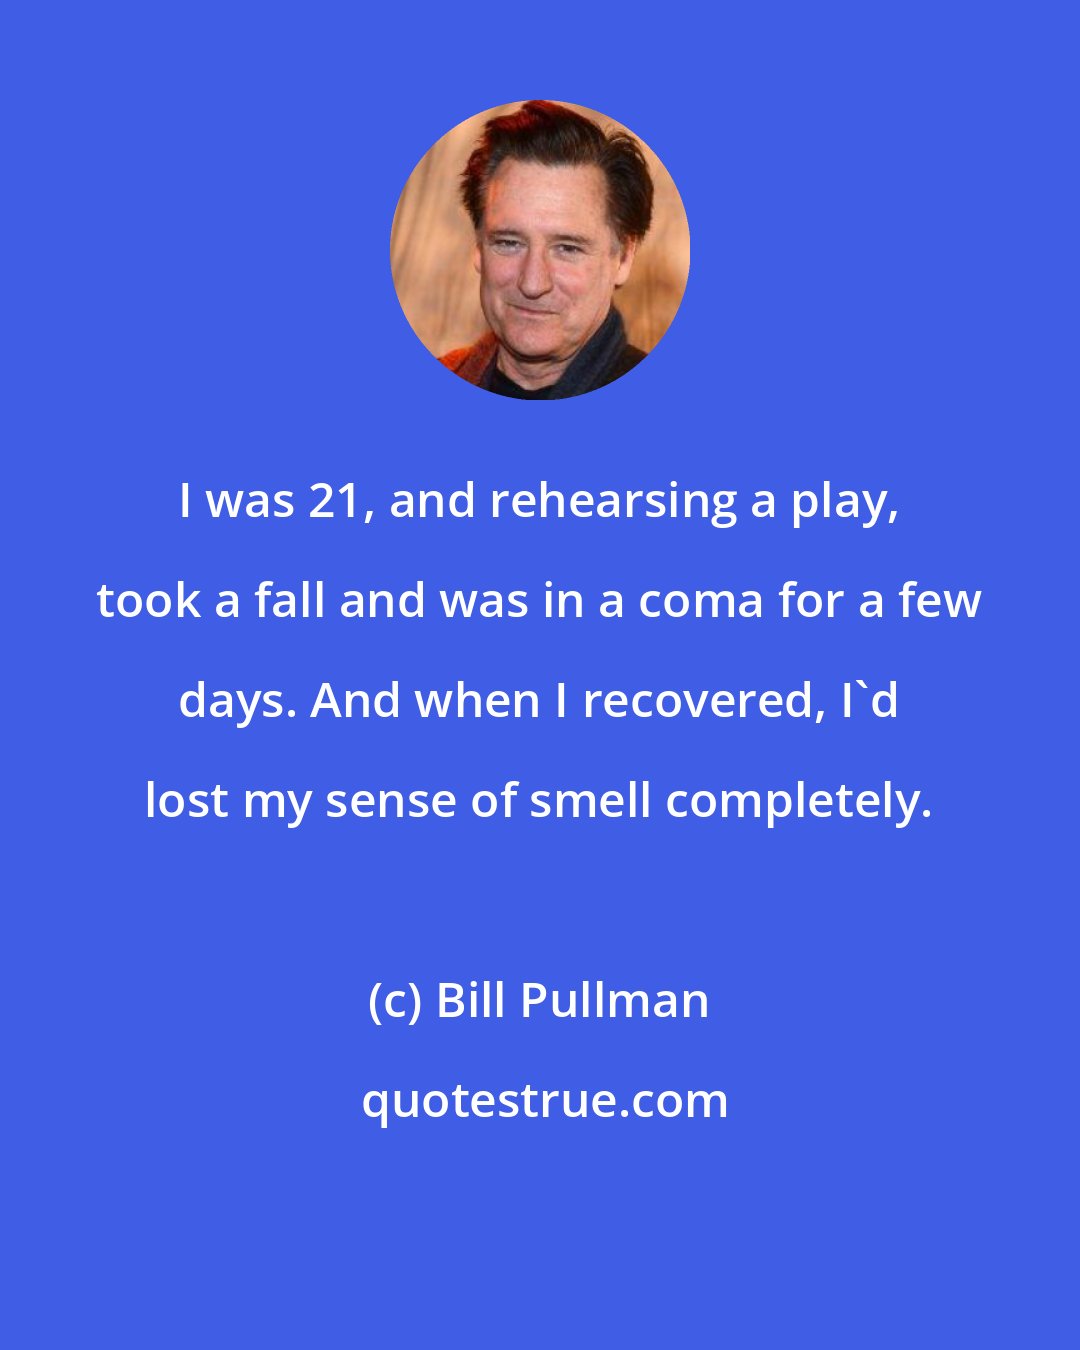 Bill Pullman: I was 21, and rehearsing a play, took a fall and was in a coma for a few days. And when I recovered, I'd lost my sense of smell completely.